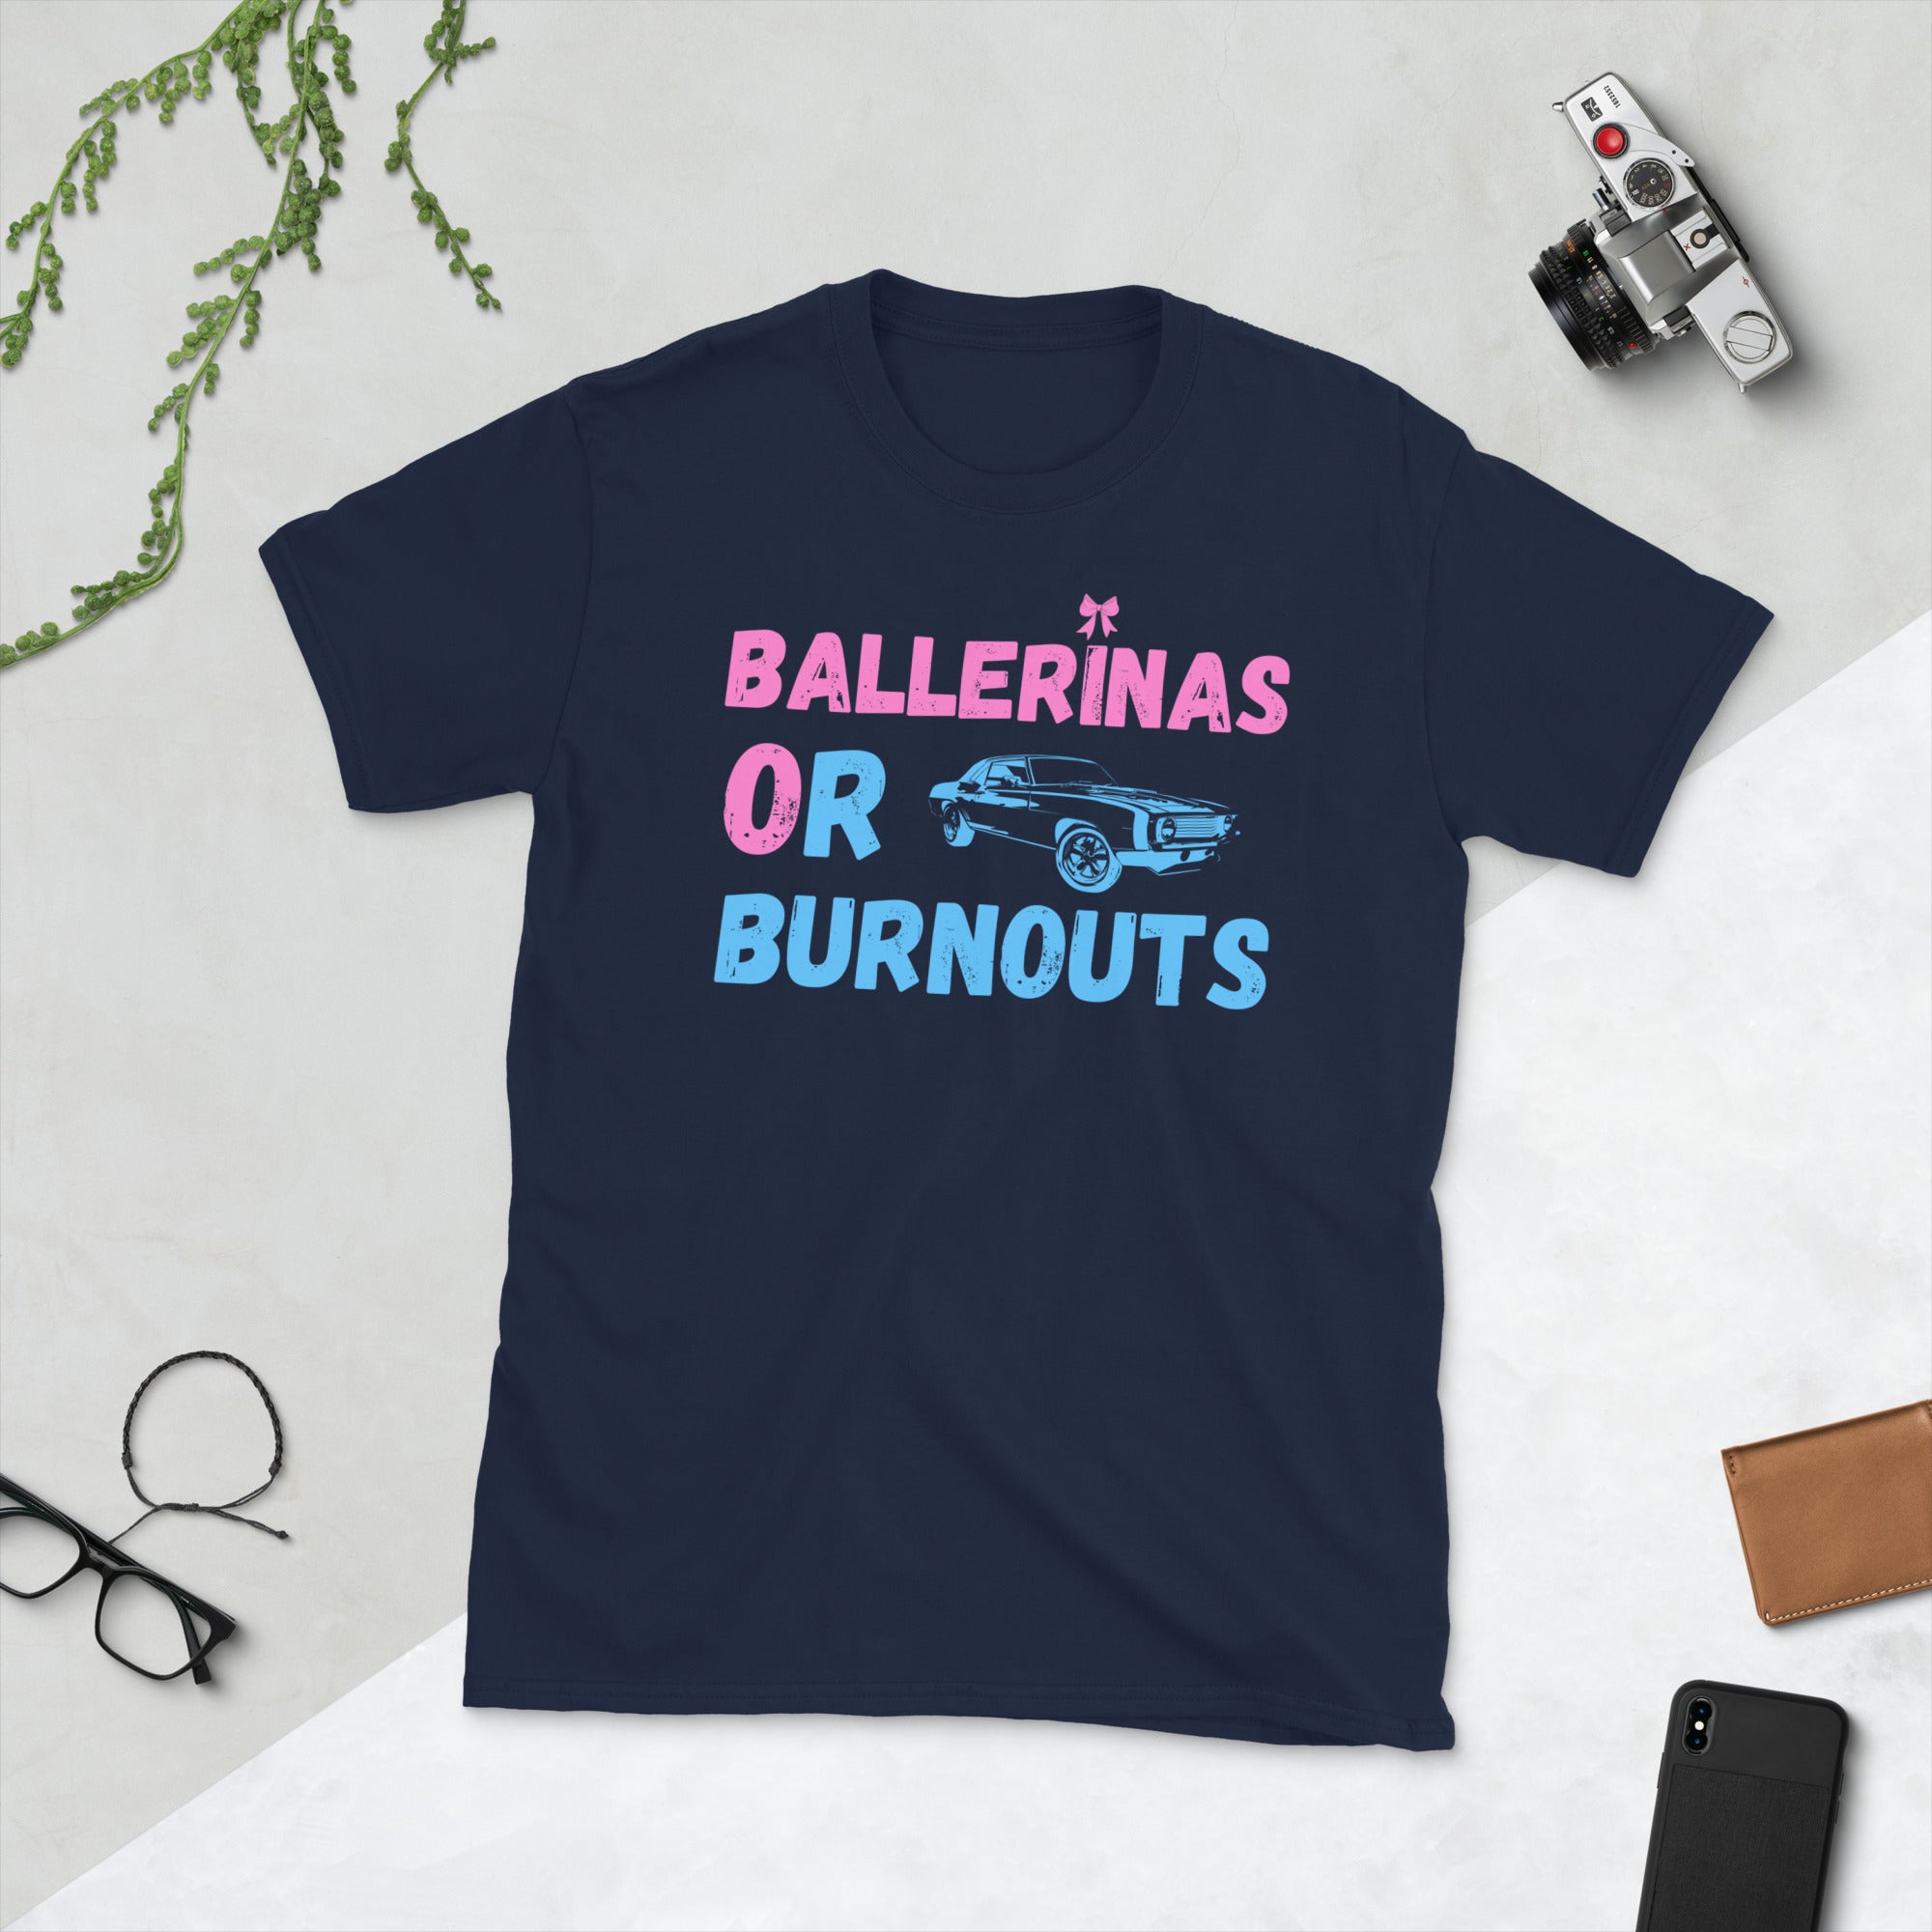 Ballerinas Or Burnouts Shirt, Gender Reveal TShirt, Pregnancy Announcement, New Parent Gifts, Gender Reveal Party Tshirt, Baby Shower Tee